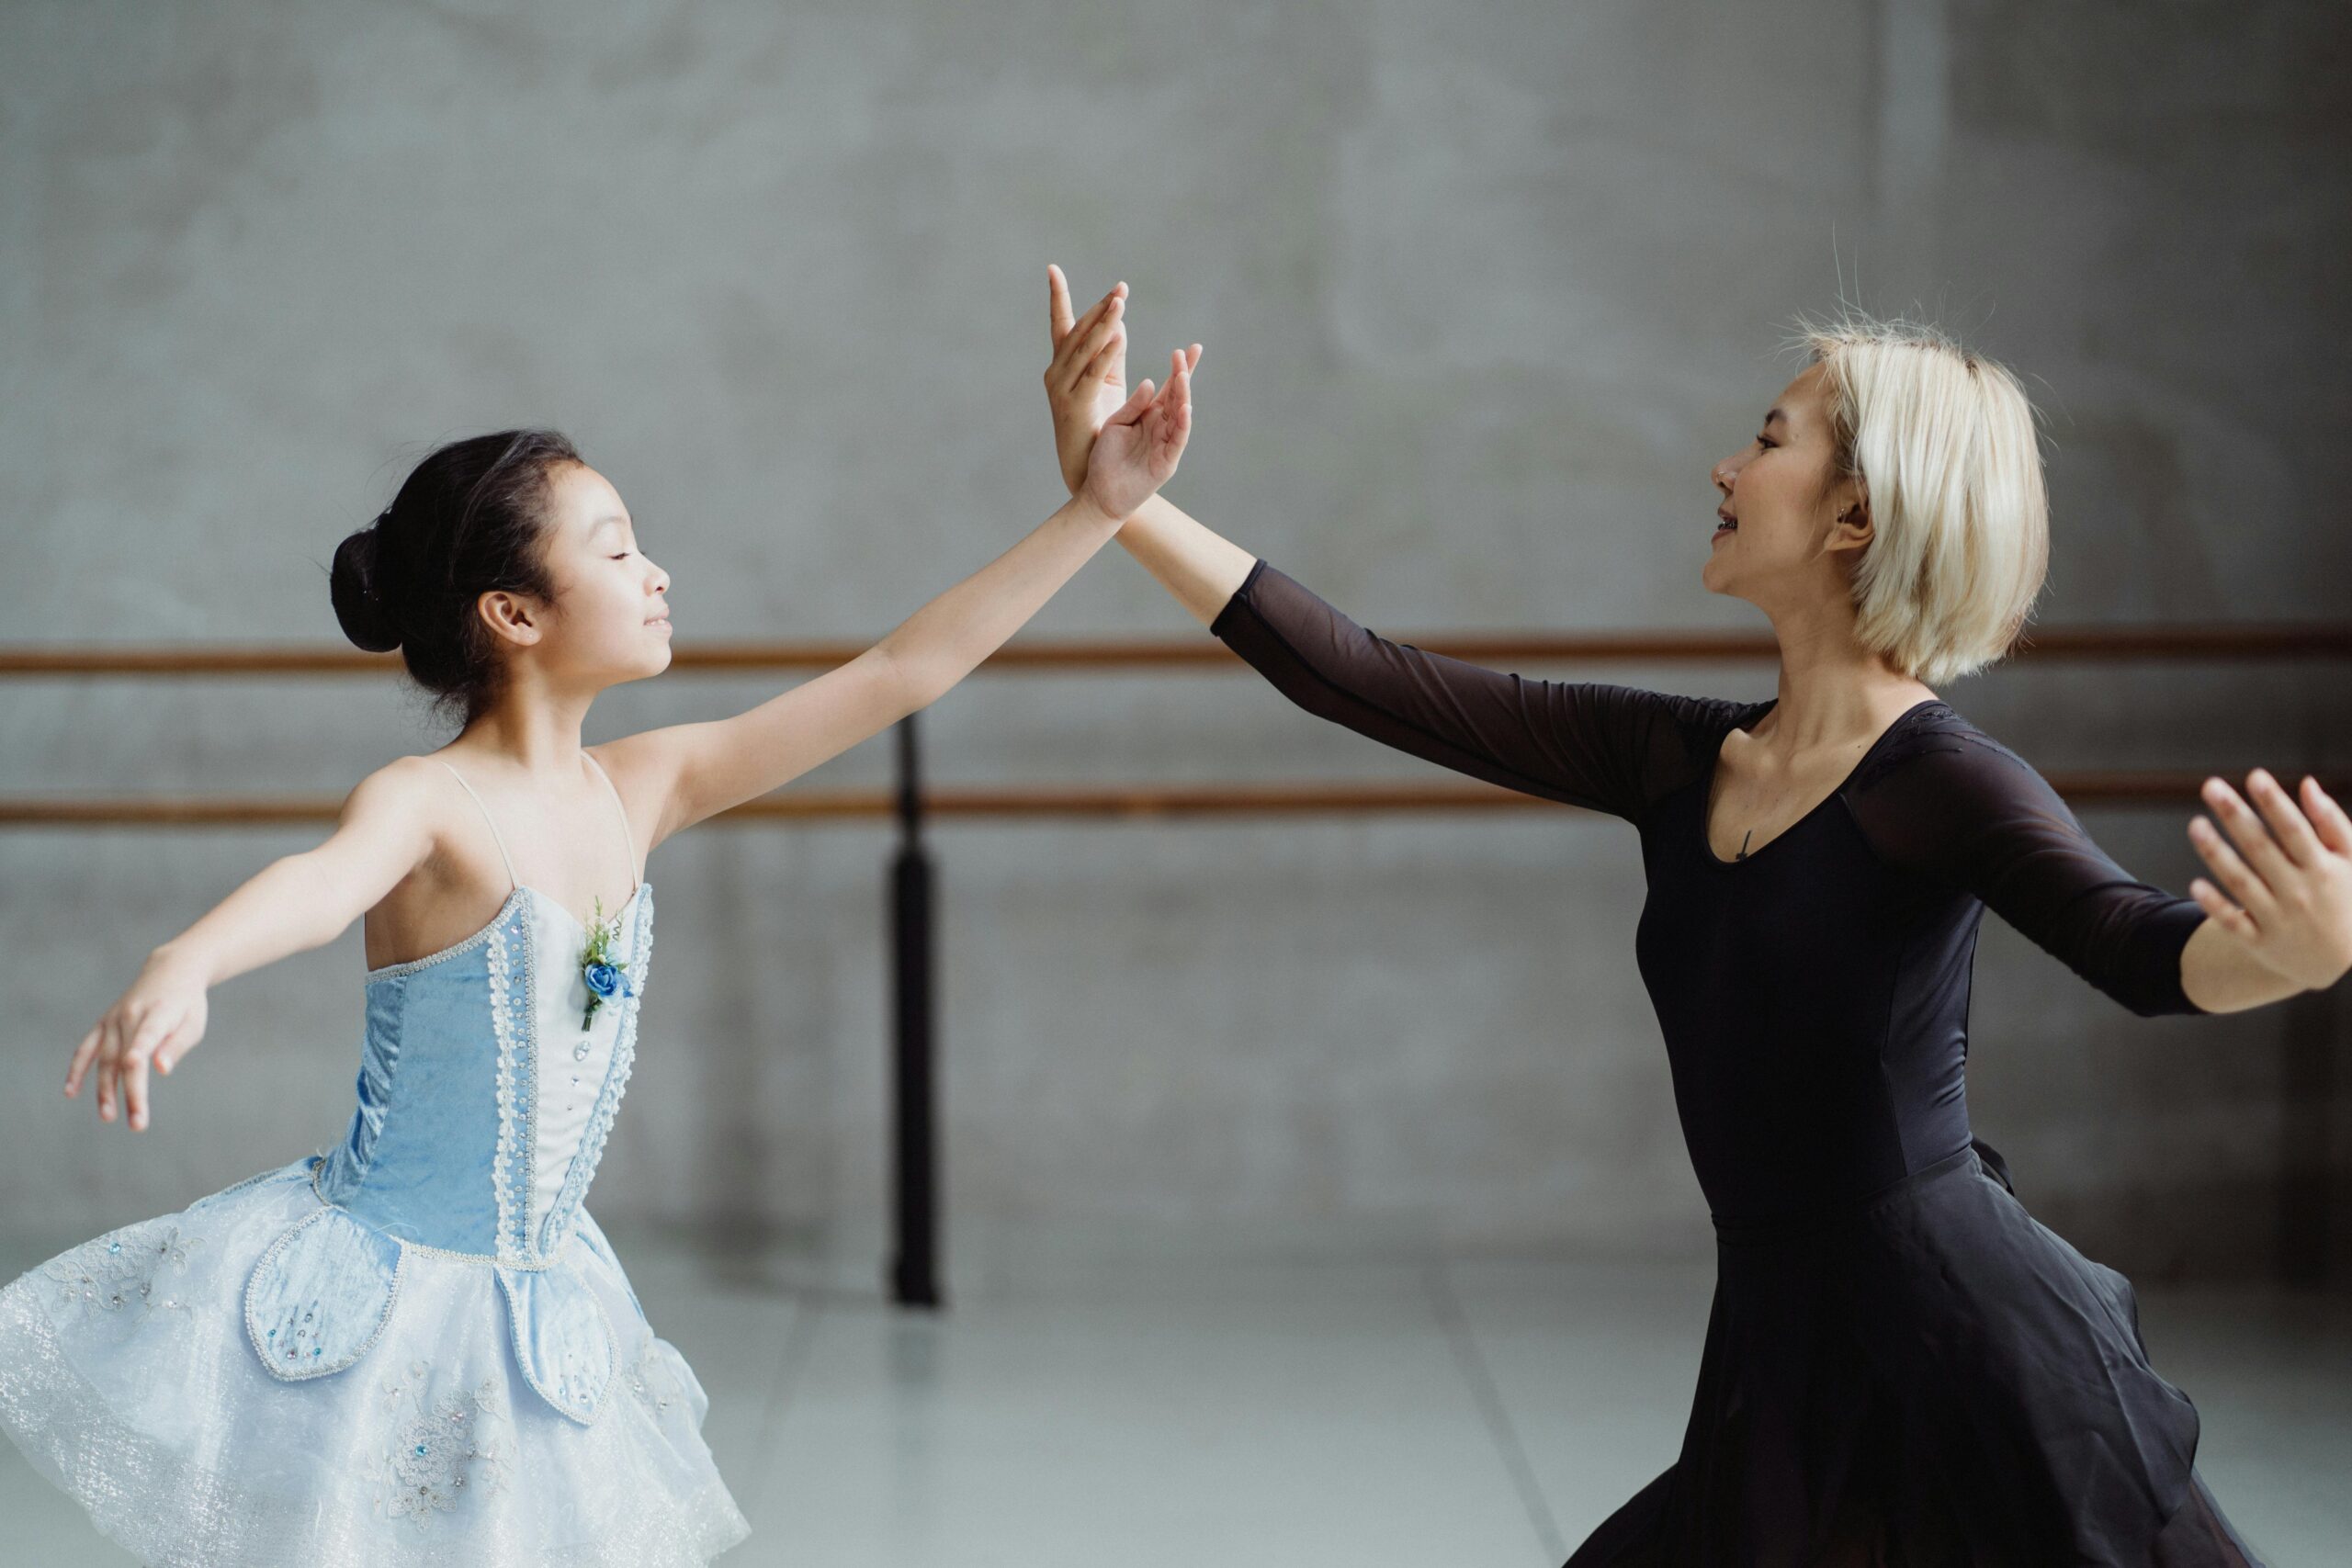 Ballet teacher practicing techniques with a young ballet student